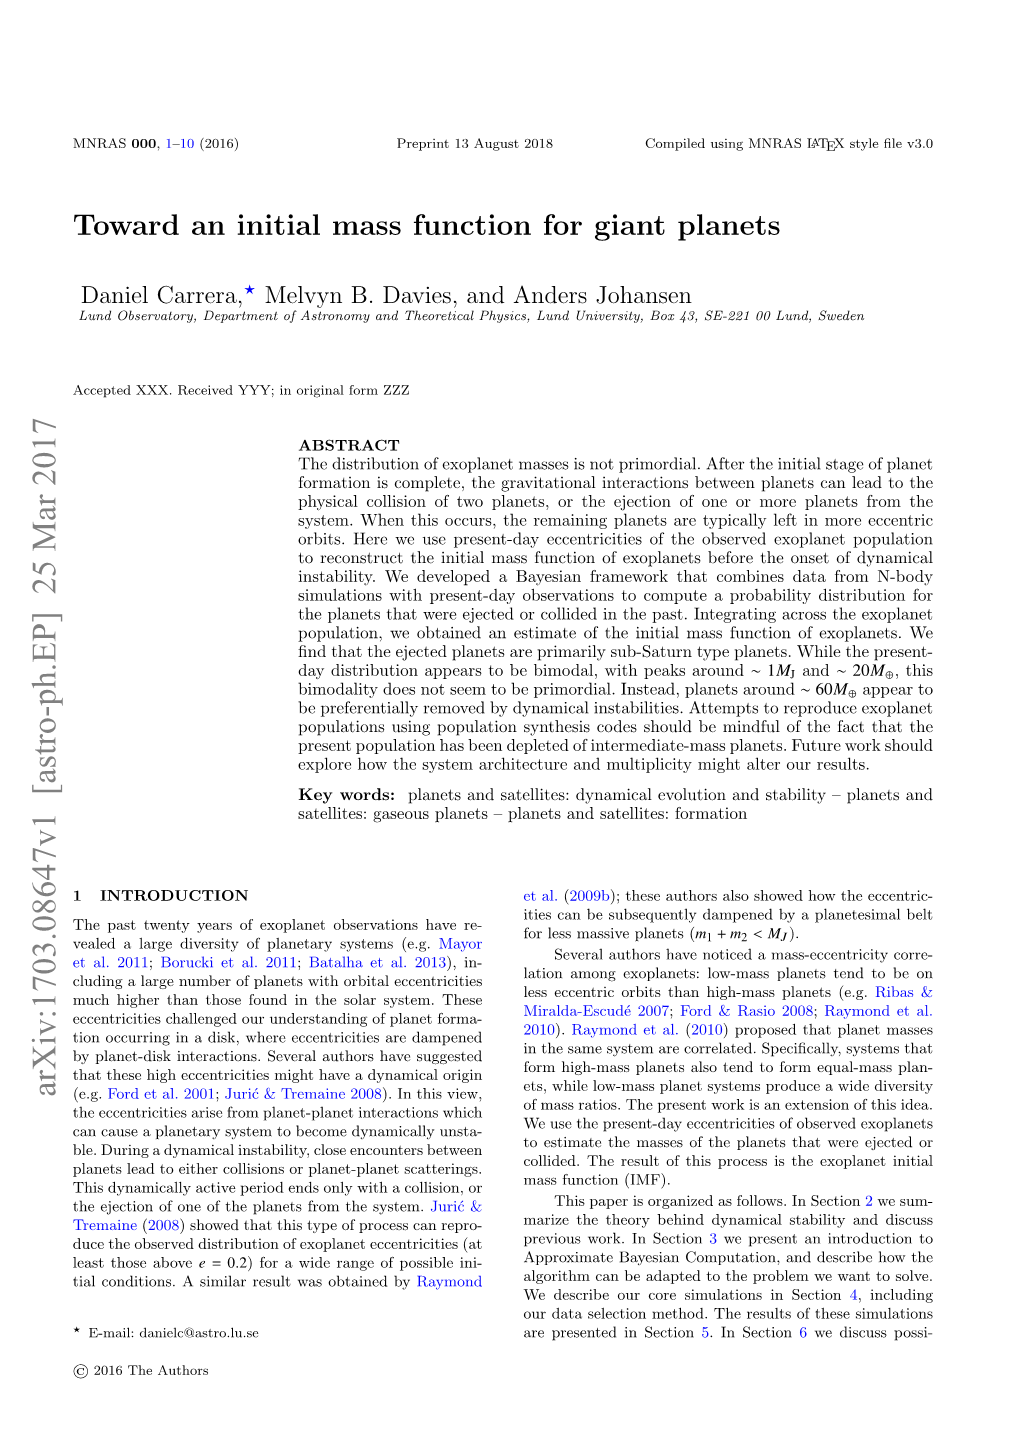 Toward an Initial Mass Function for Giant Planets